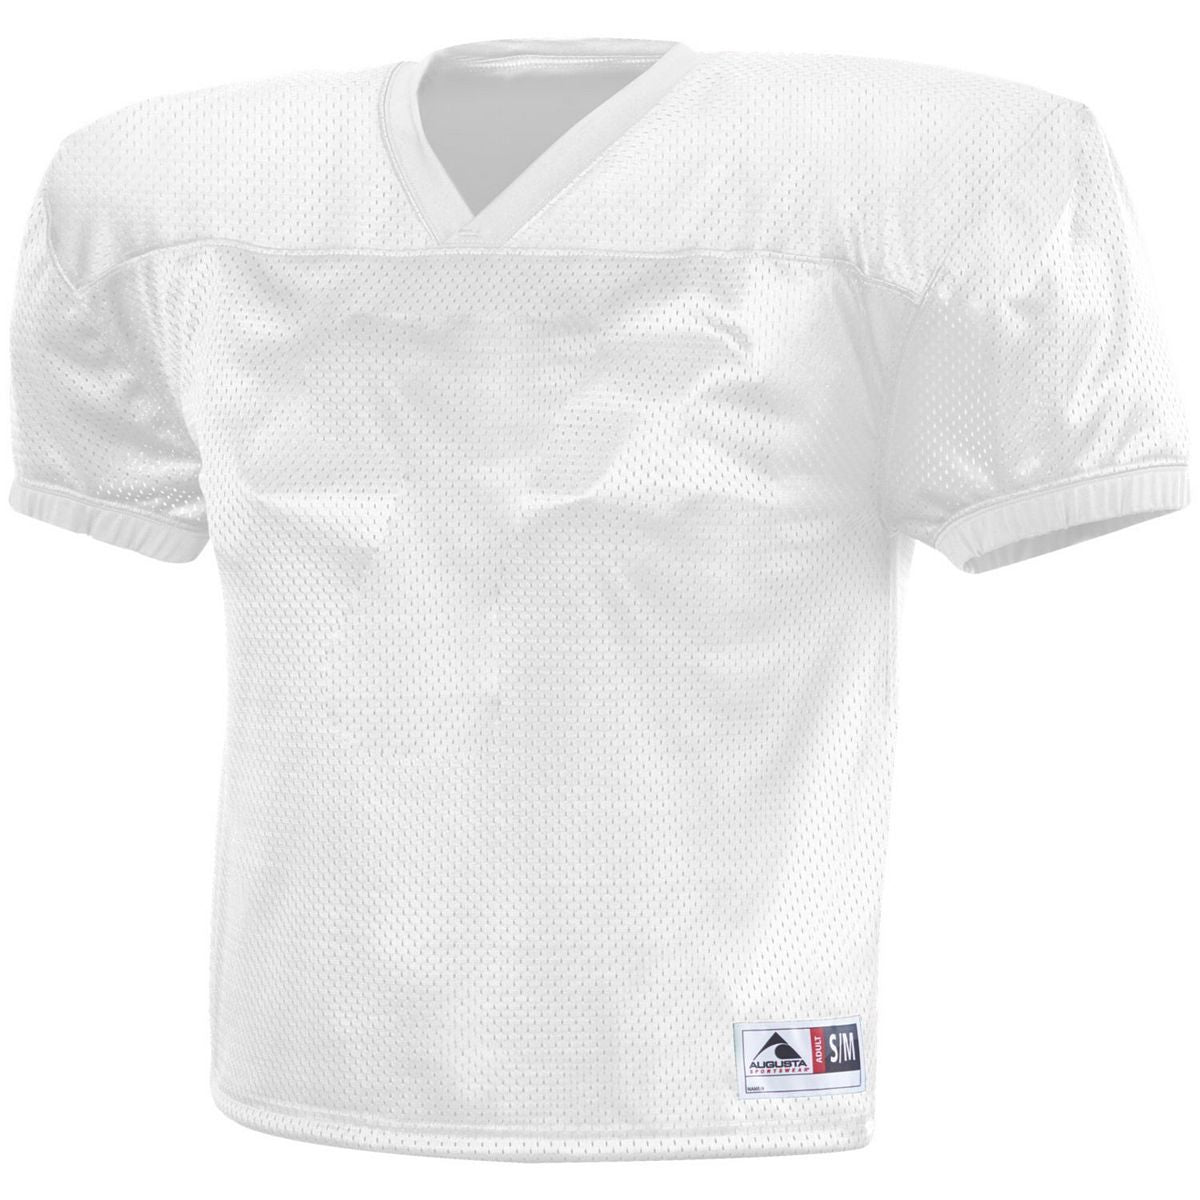 Augusta Sportswear Dash Practice Jersey in White  -Part of the Adult, Adult-Jersey, Augusta-Products, Football, Shirts, All-Sports, All-Sports-1 product lines at KanaleyCreations.com